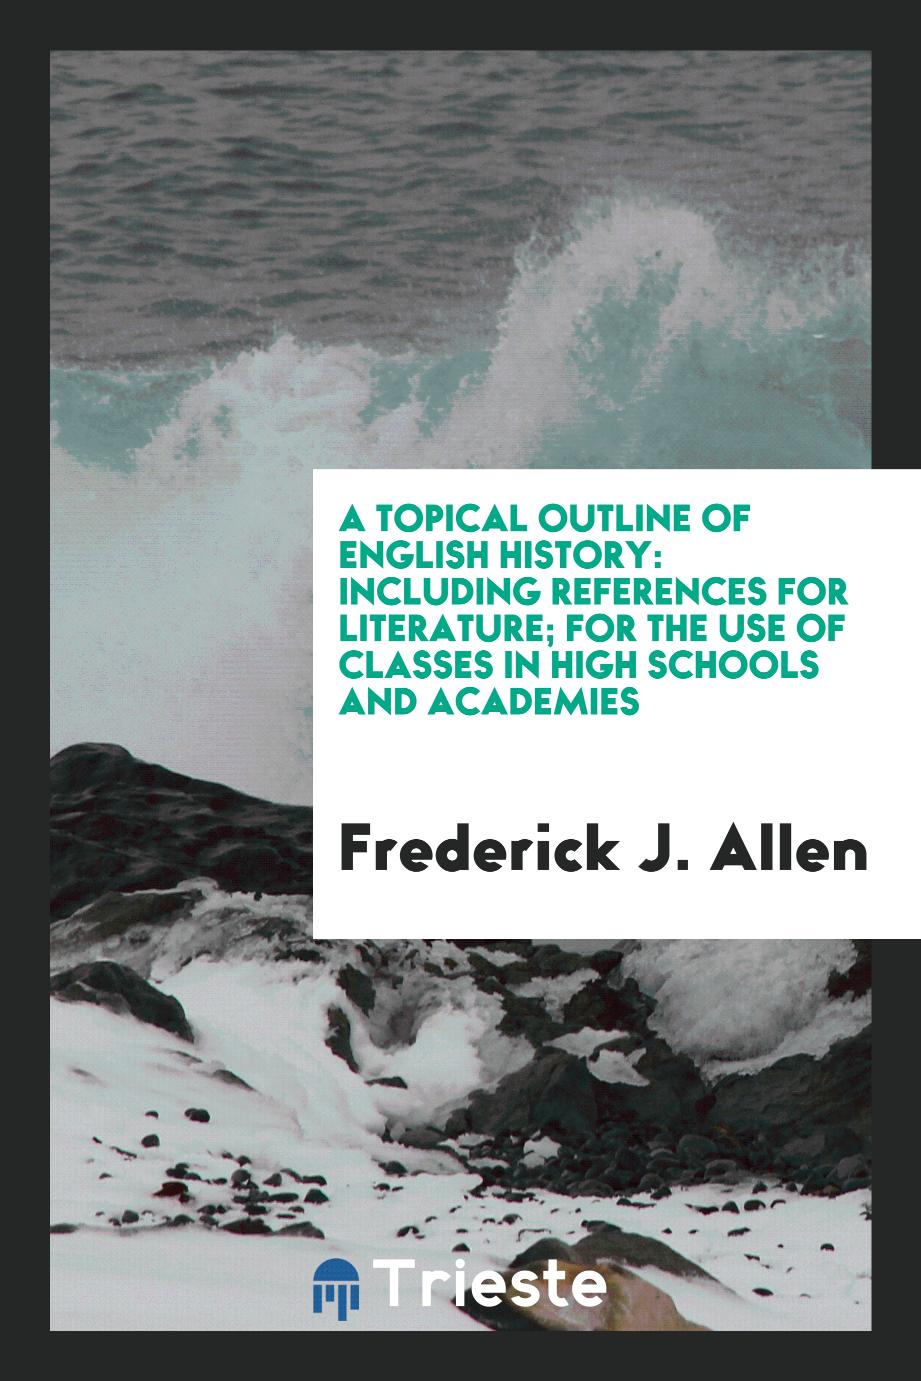 A Topical Outline of English History: Including References for Literature; for the Use of Classes in High schools and Academies